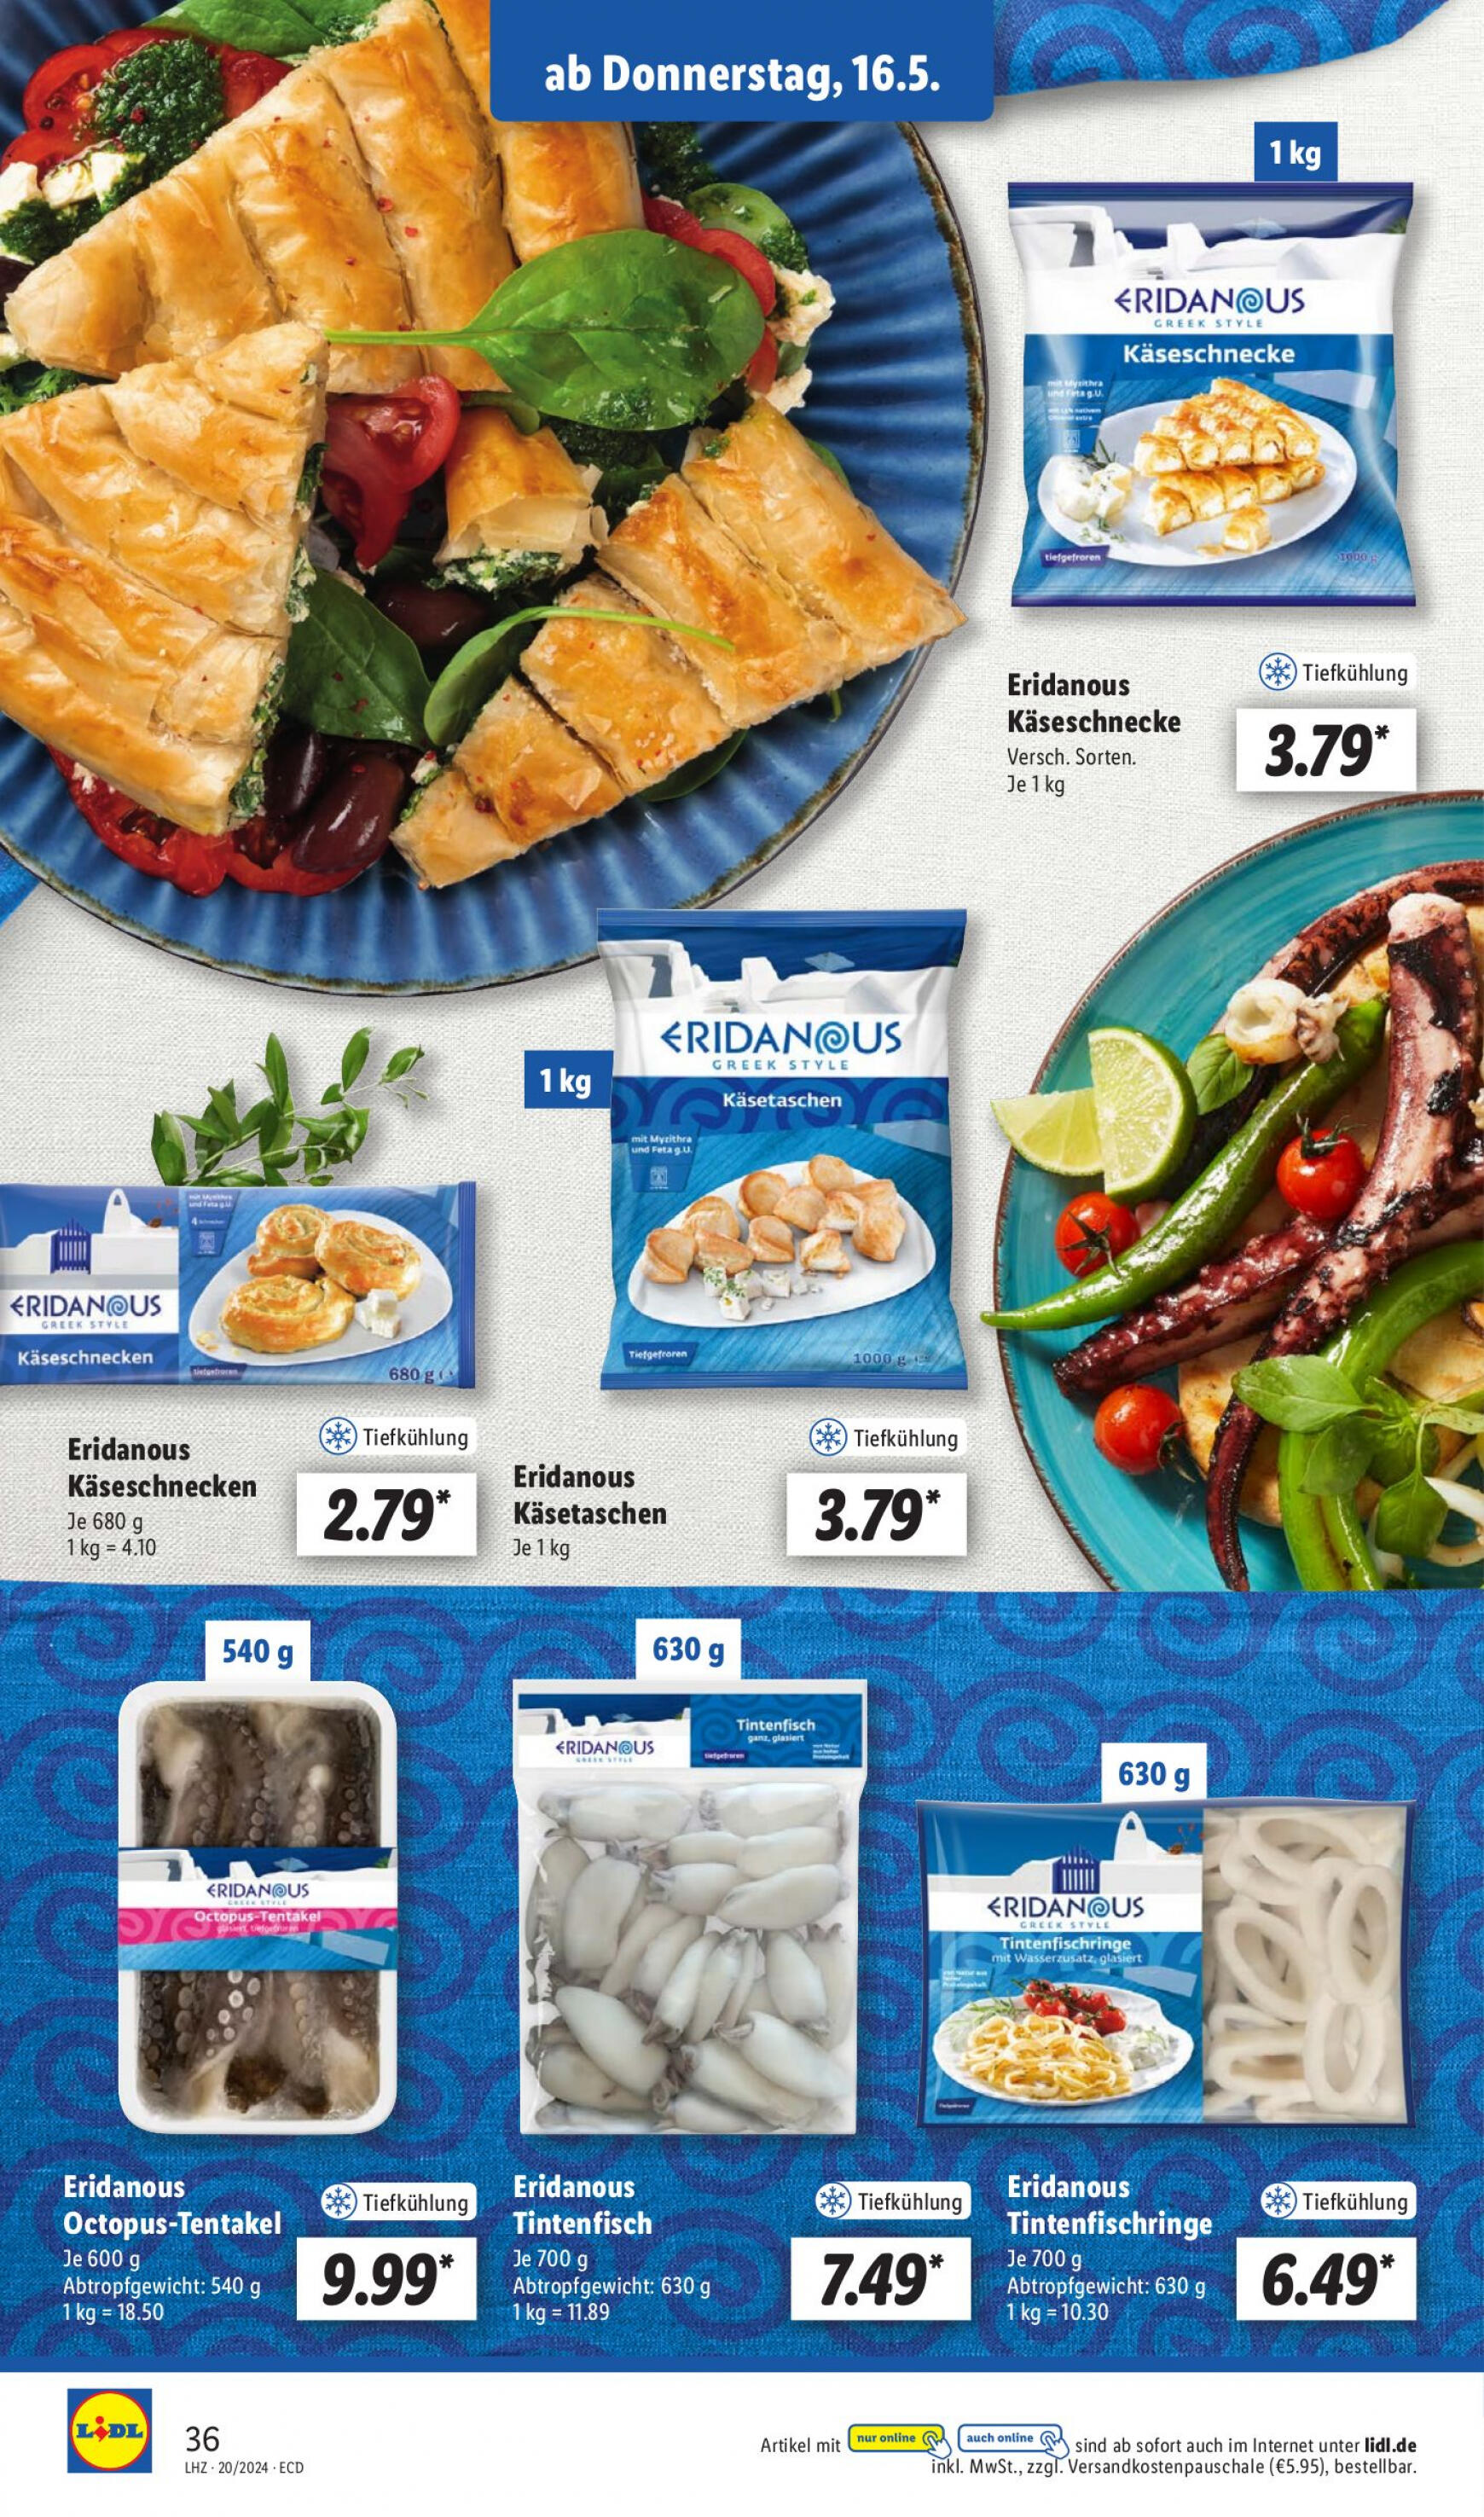 lidl - Flyer Lidl aktuell 13.05. - 18.05. - page: 42